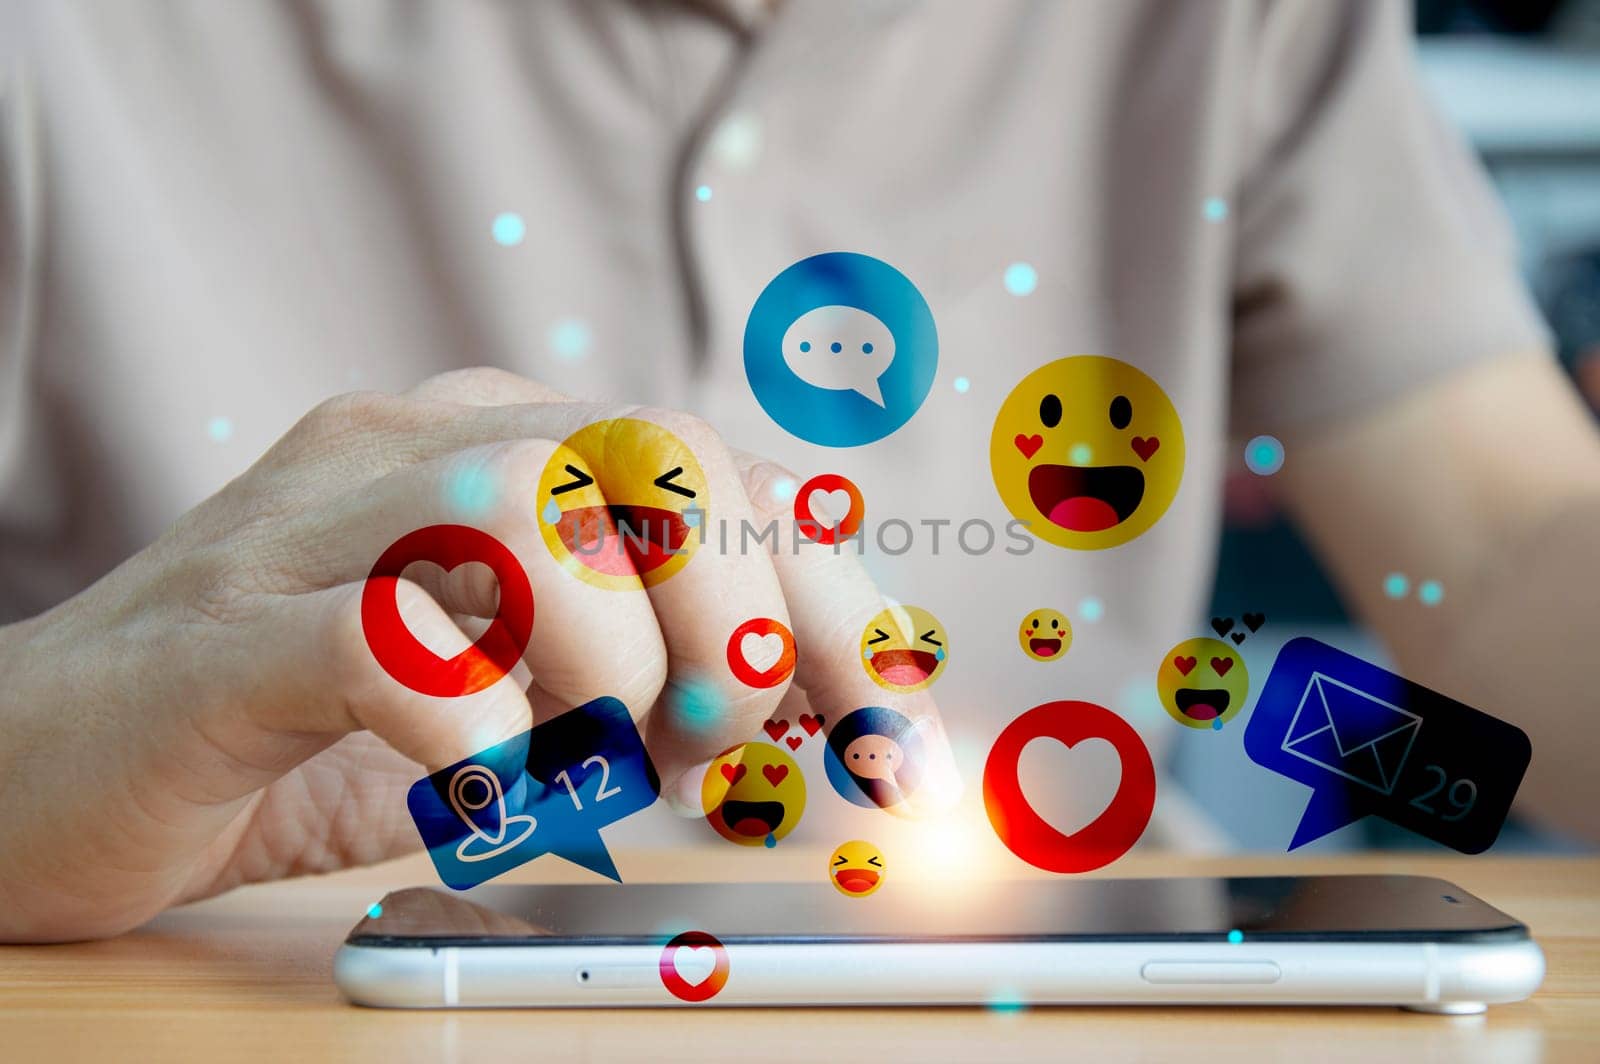 Use of social media and digital smartphones Holiday lifestyle and social media concept online marketing Connecting technology networks in global business by boonruen